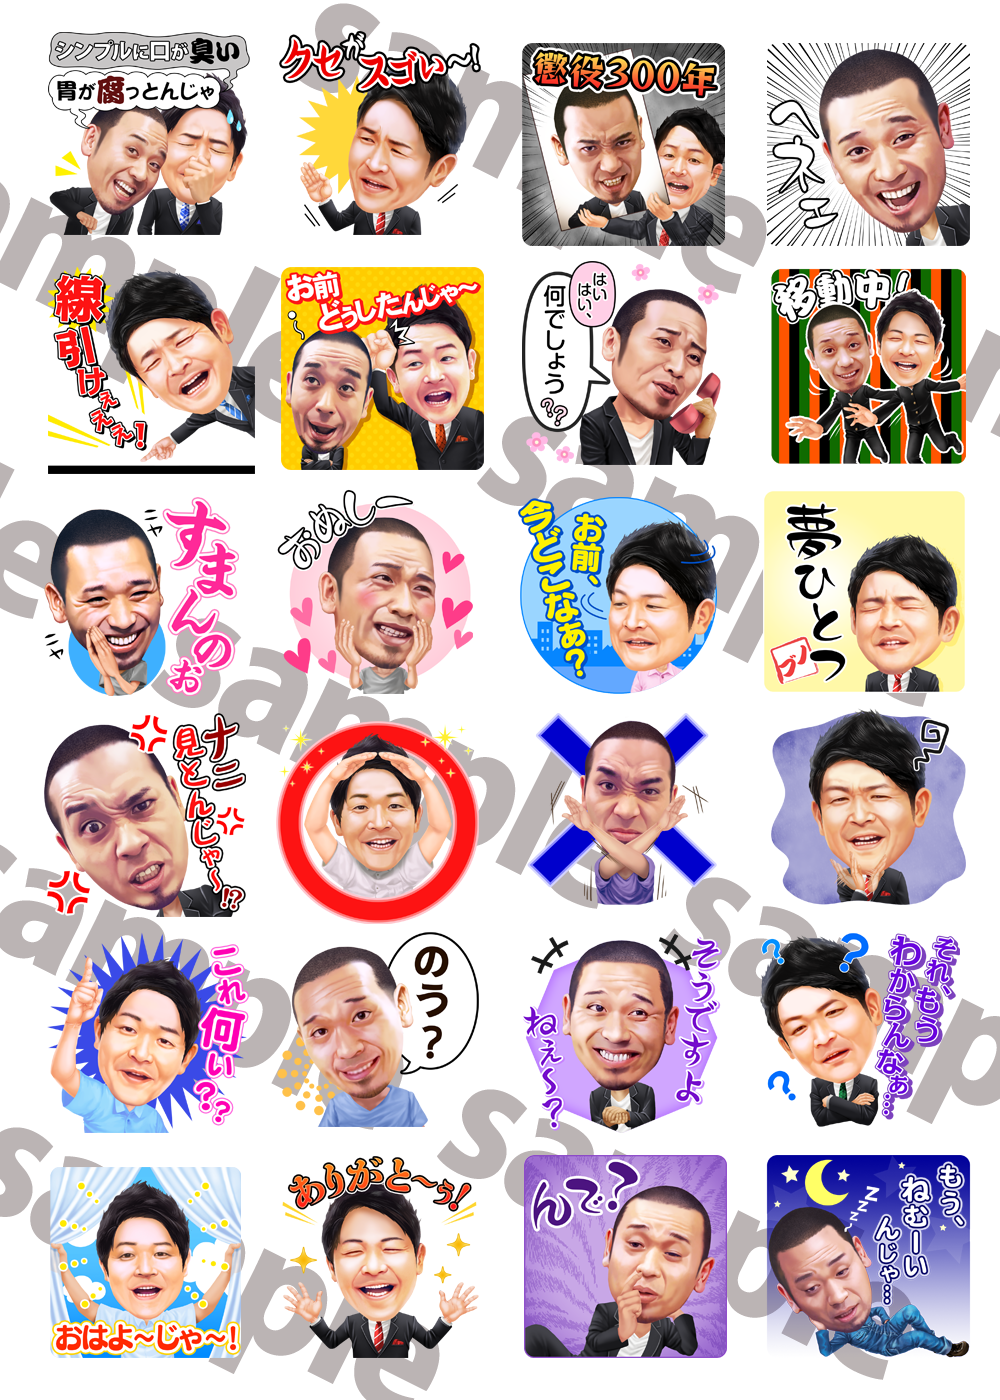 http://news.yoshimoto.co.jp/20160907181832-21f83ca2a2ebec2537017c8a3bd6e50e17c65bea.png